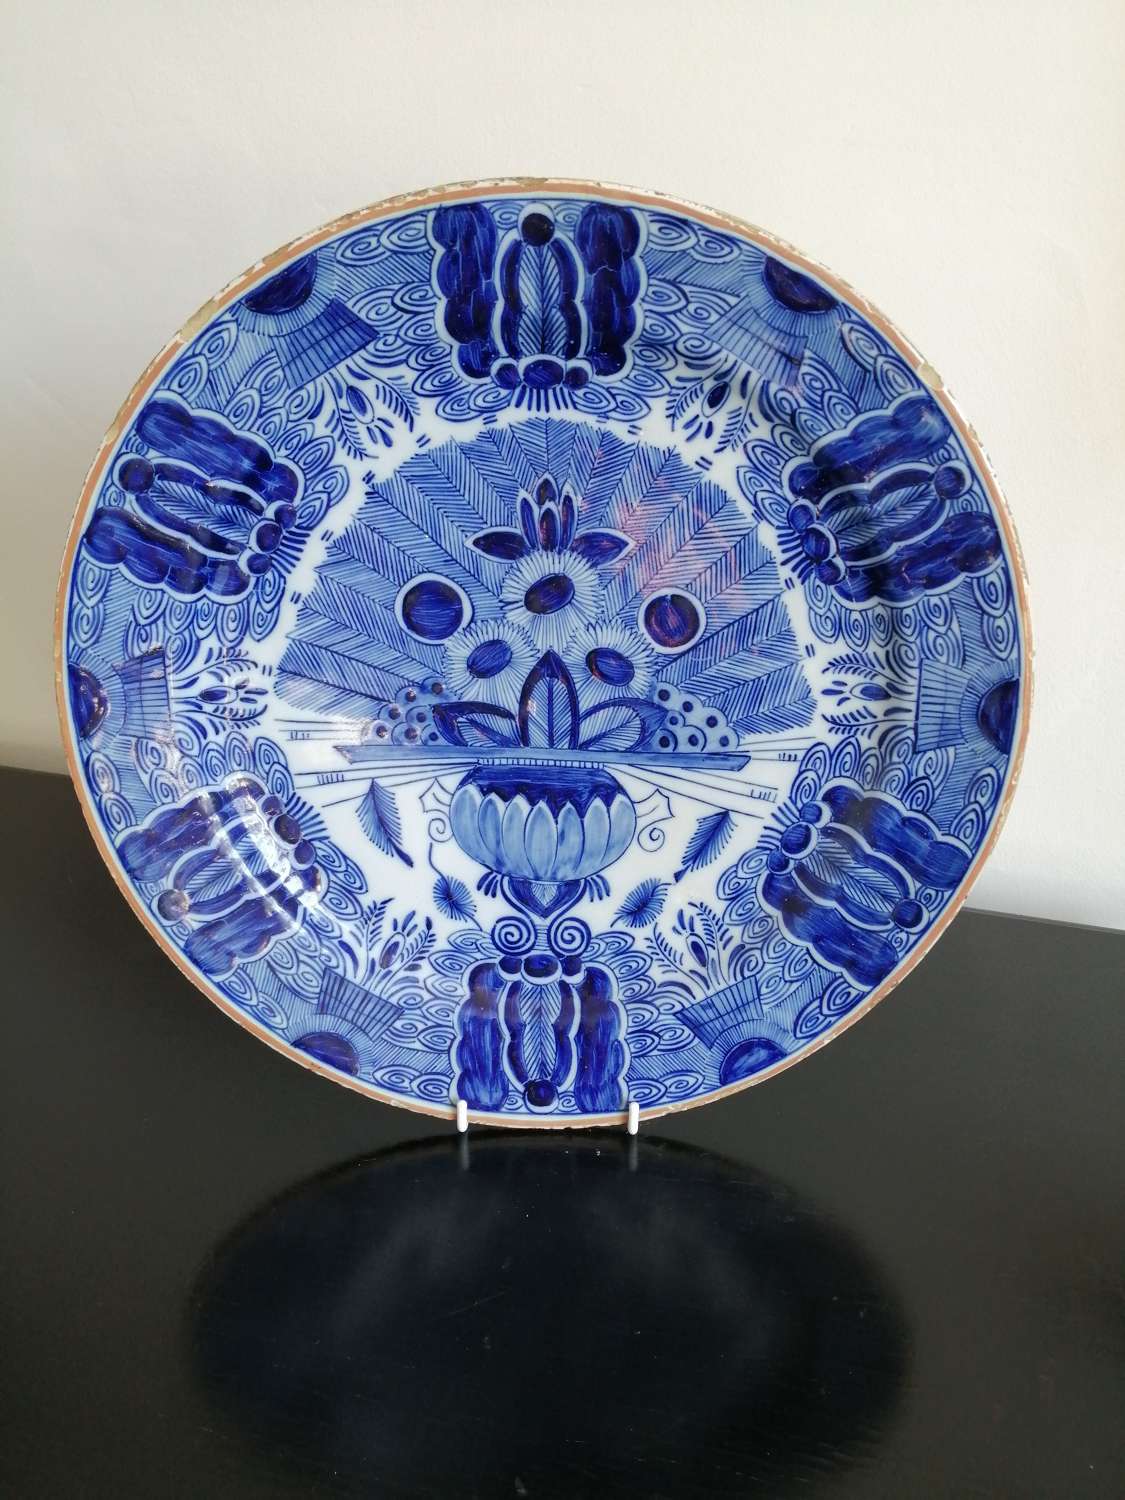 A very attractive 18th century Dutch Delft charger